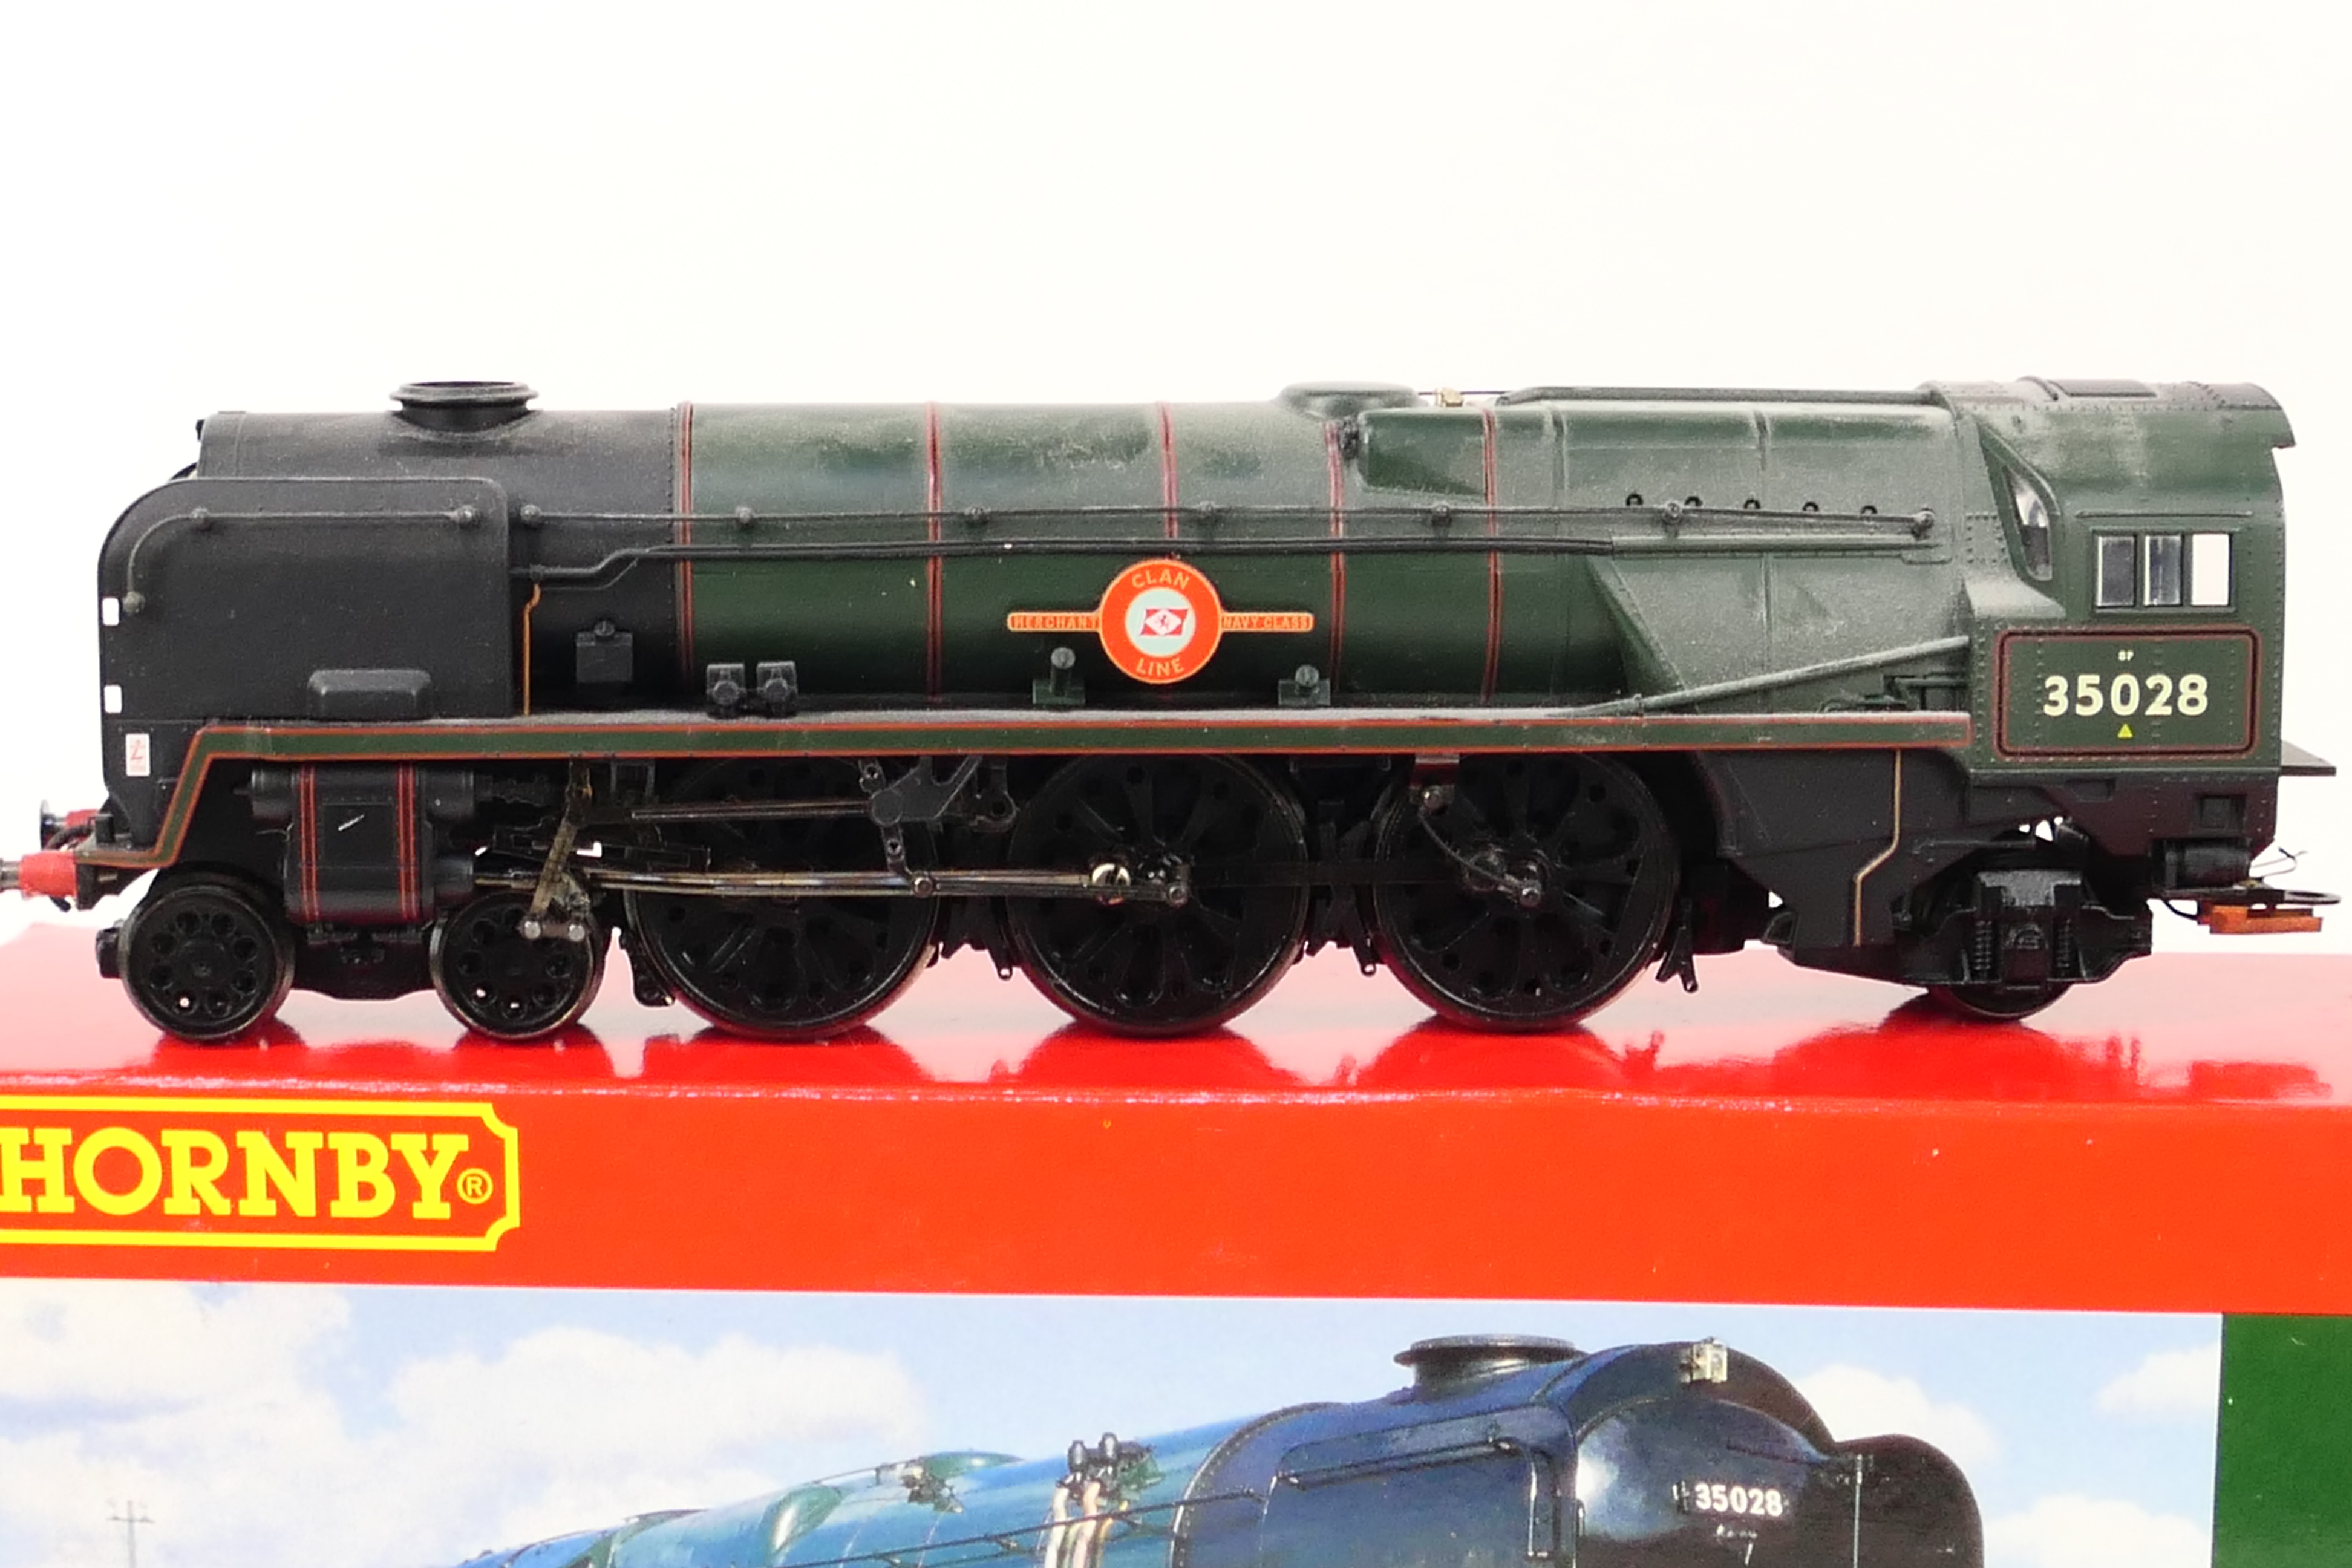 Hornby - A boxed Hornby SUPER DETAIL R2169 Merchant Navy Class 4-6-2 steam locomotive and tender Op. - Image 2 of 3